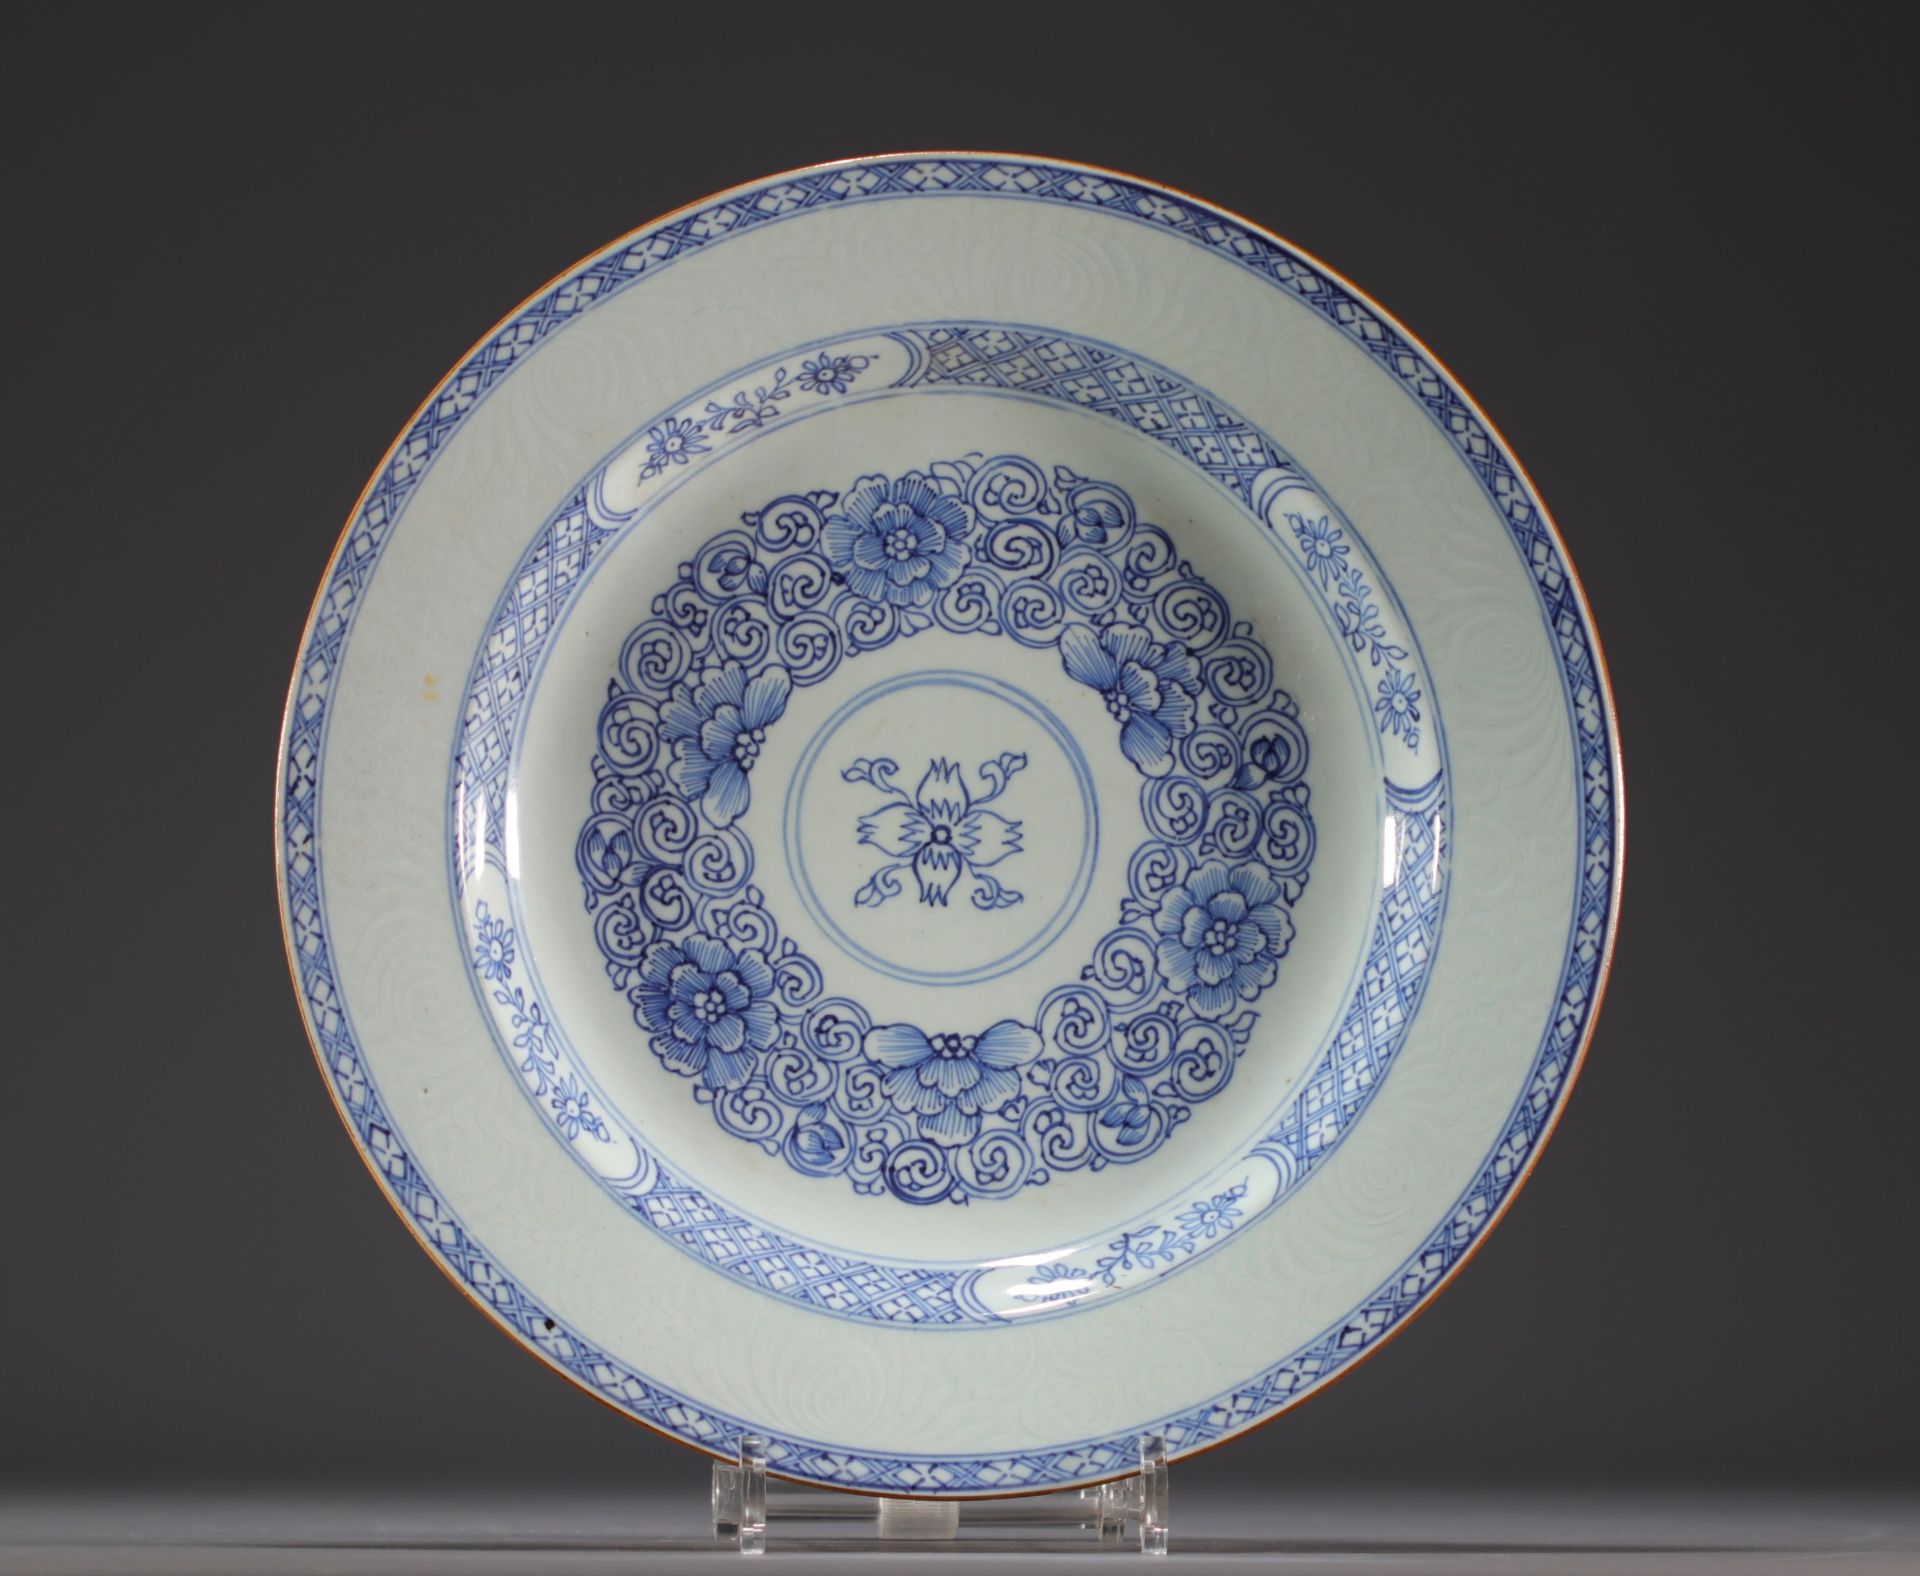 China - White-blue porcelain plate with floral decoration, Qianlong.